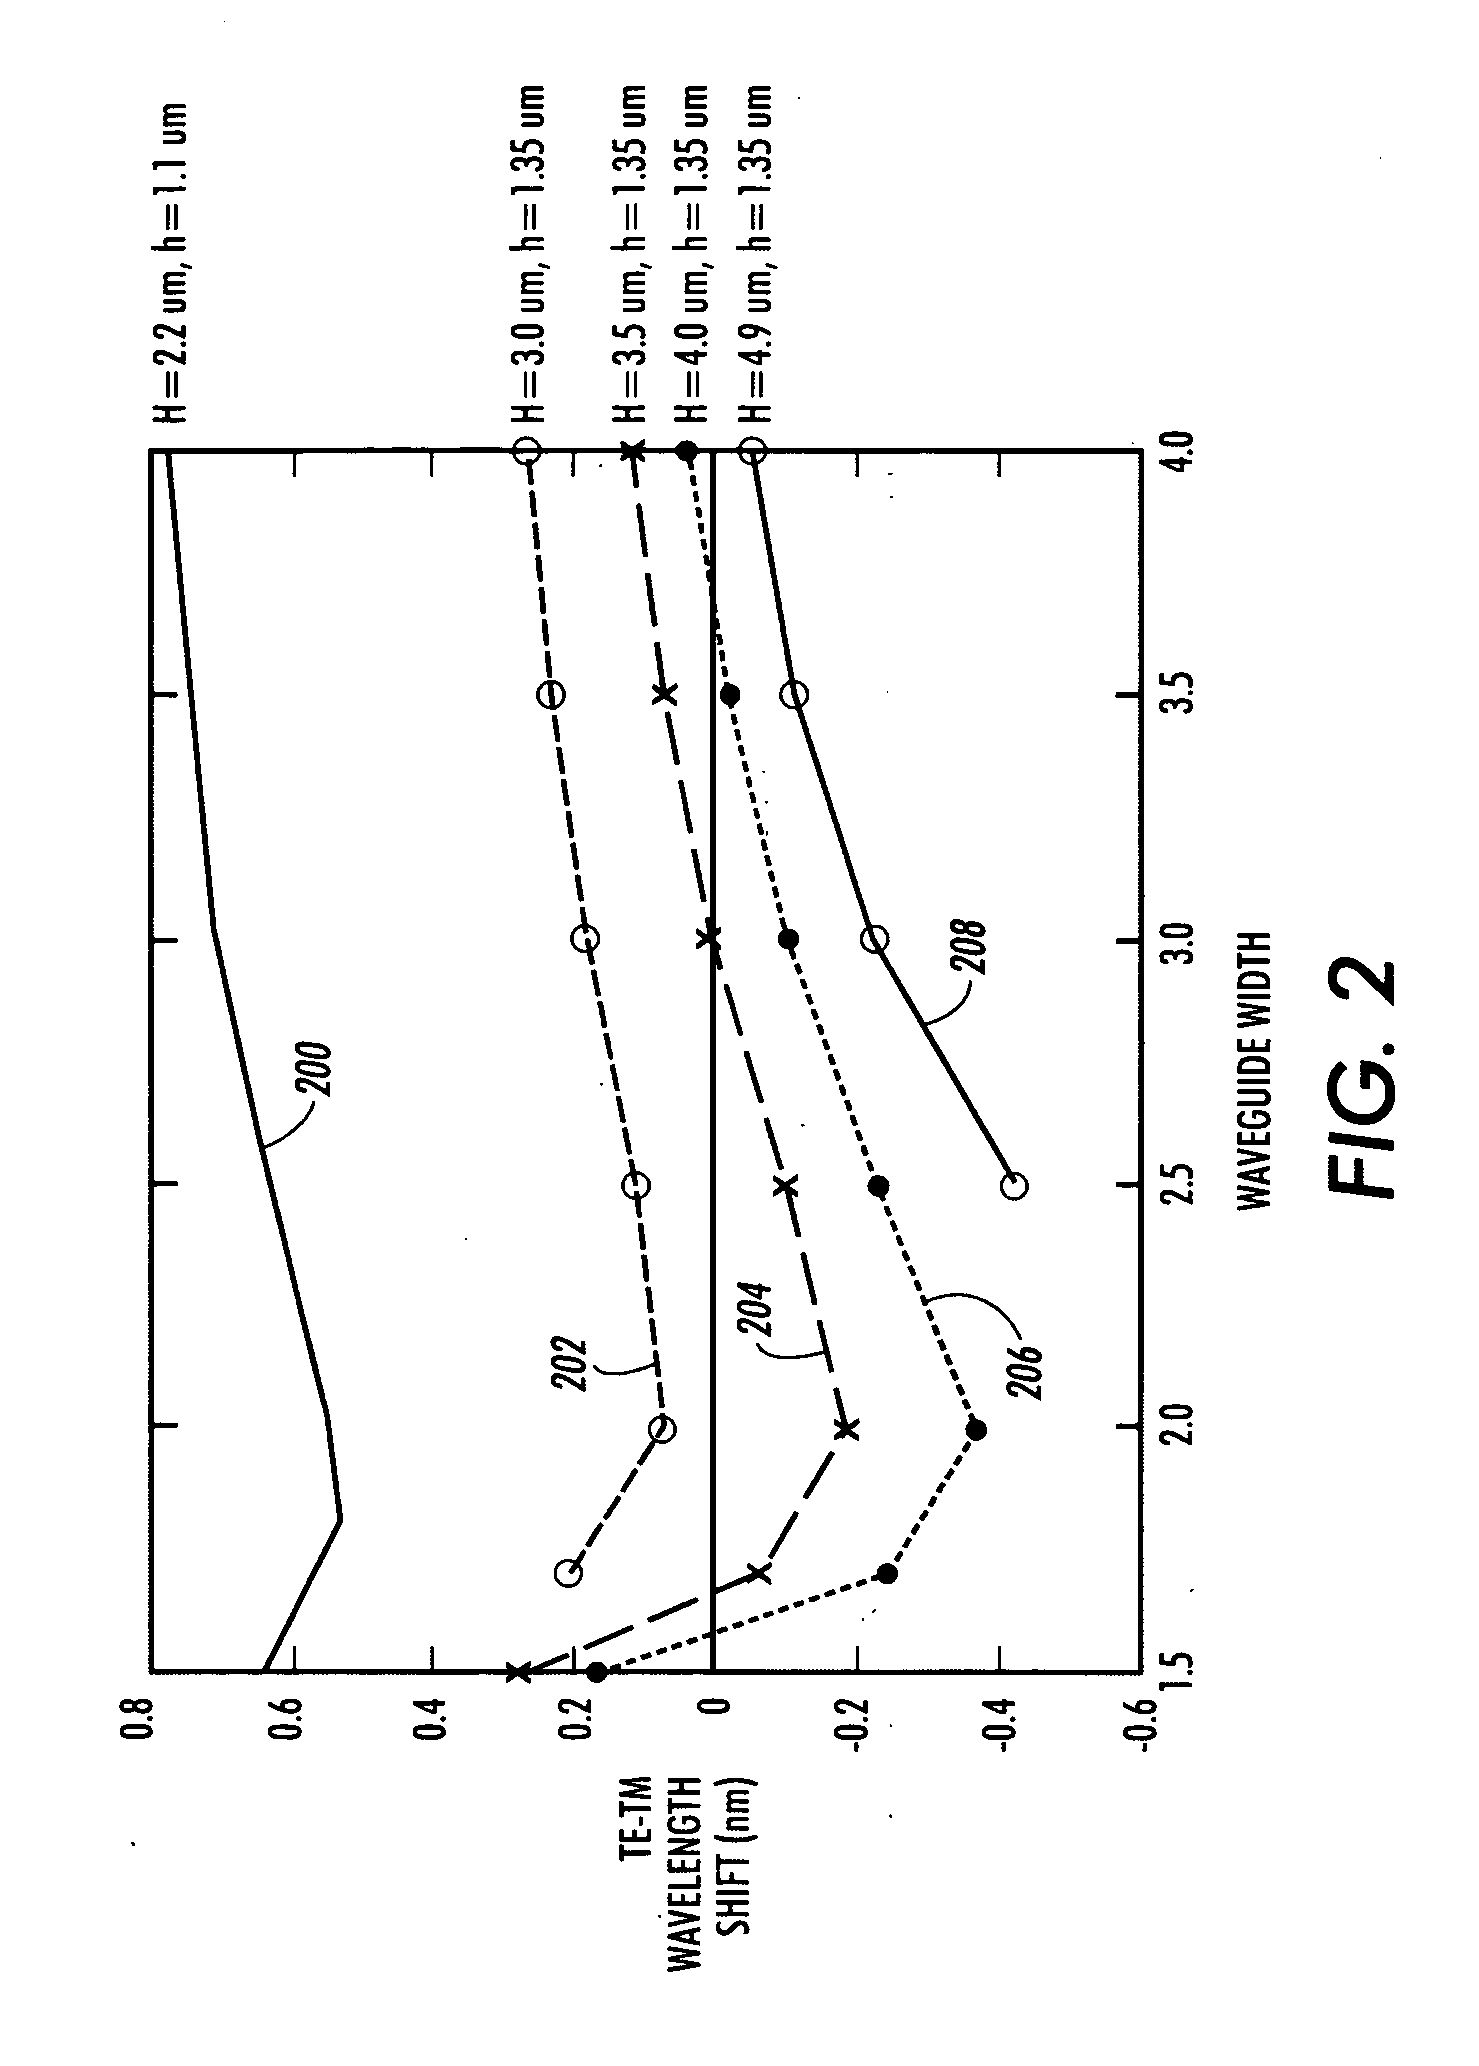 Waveguide structures and methods